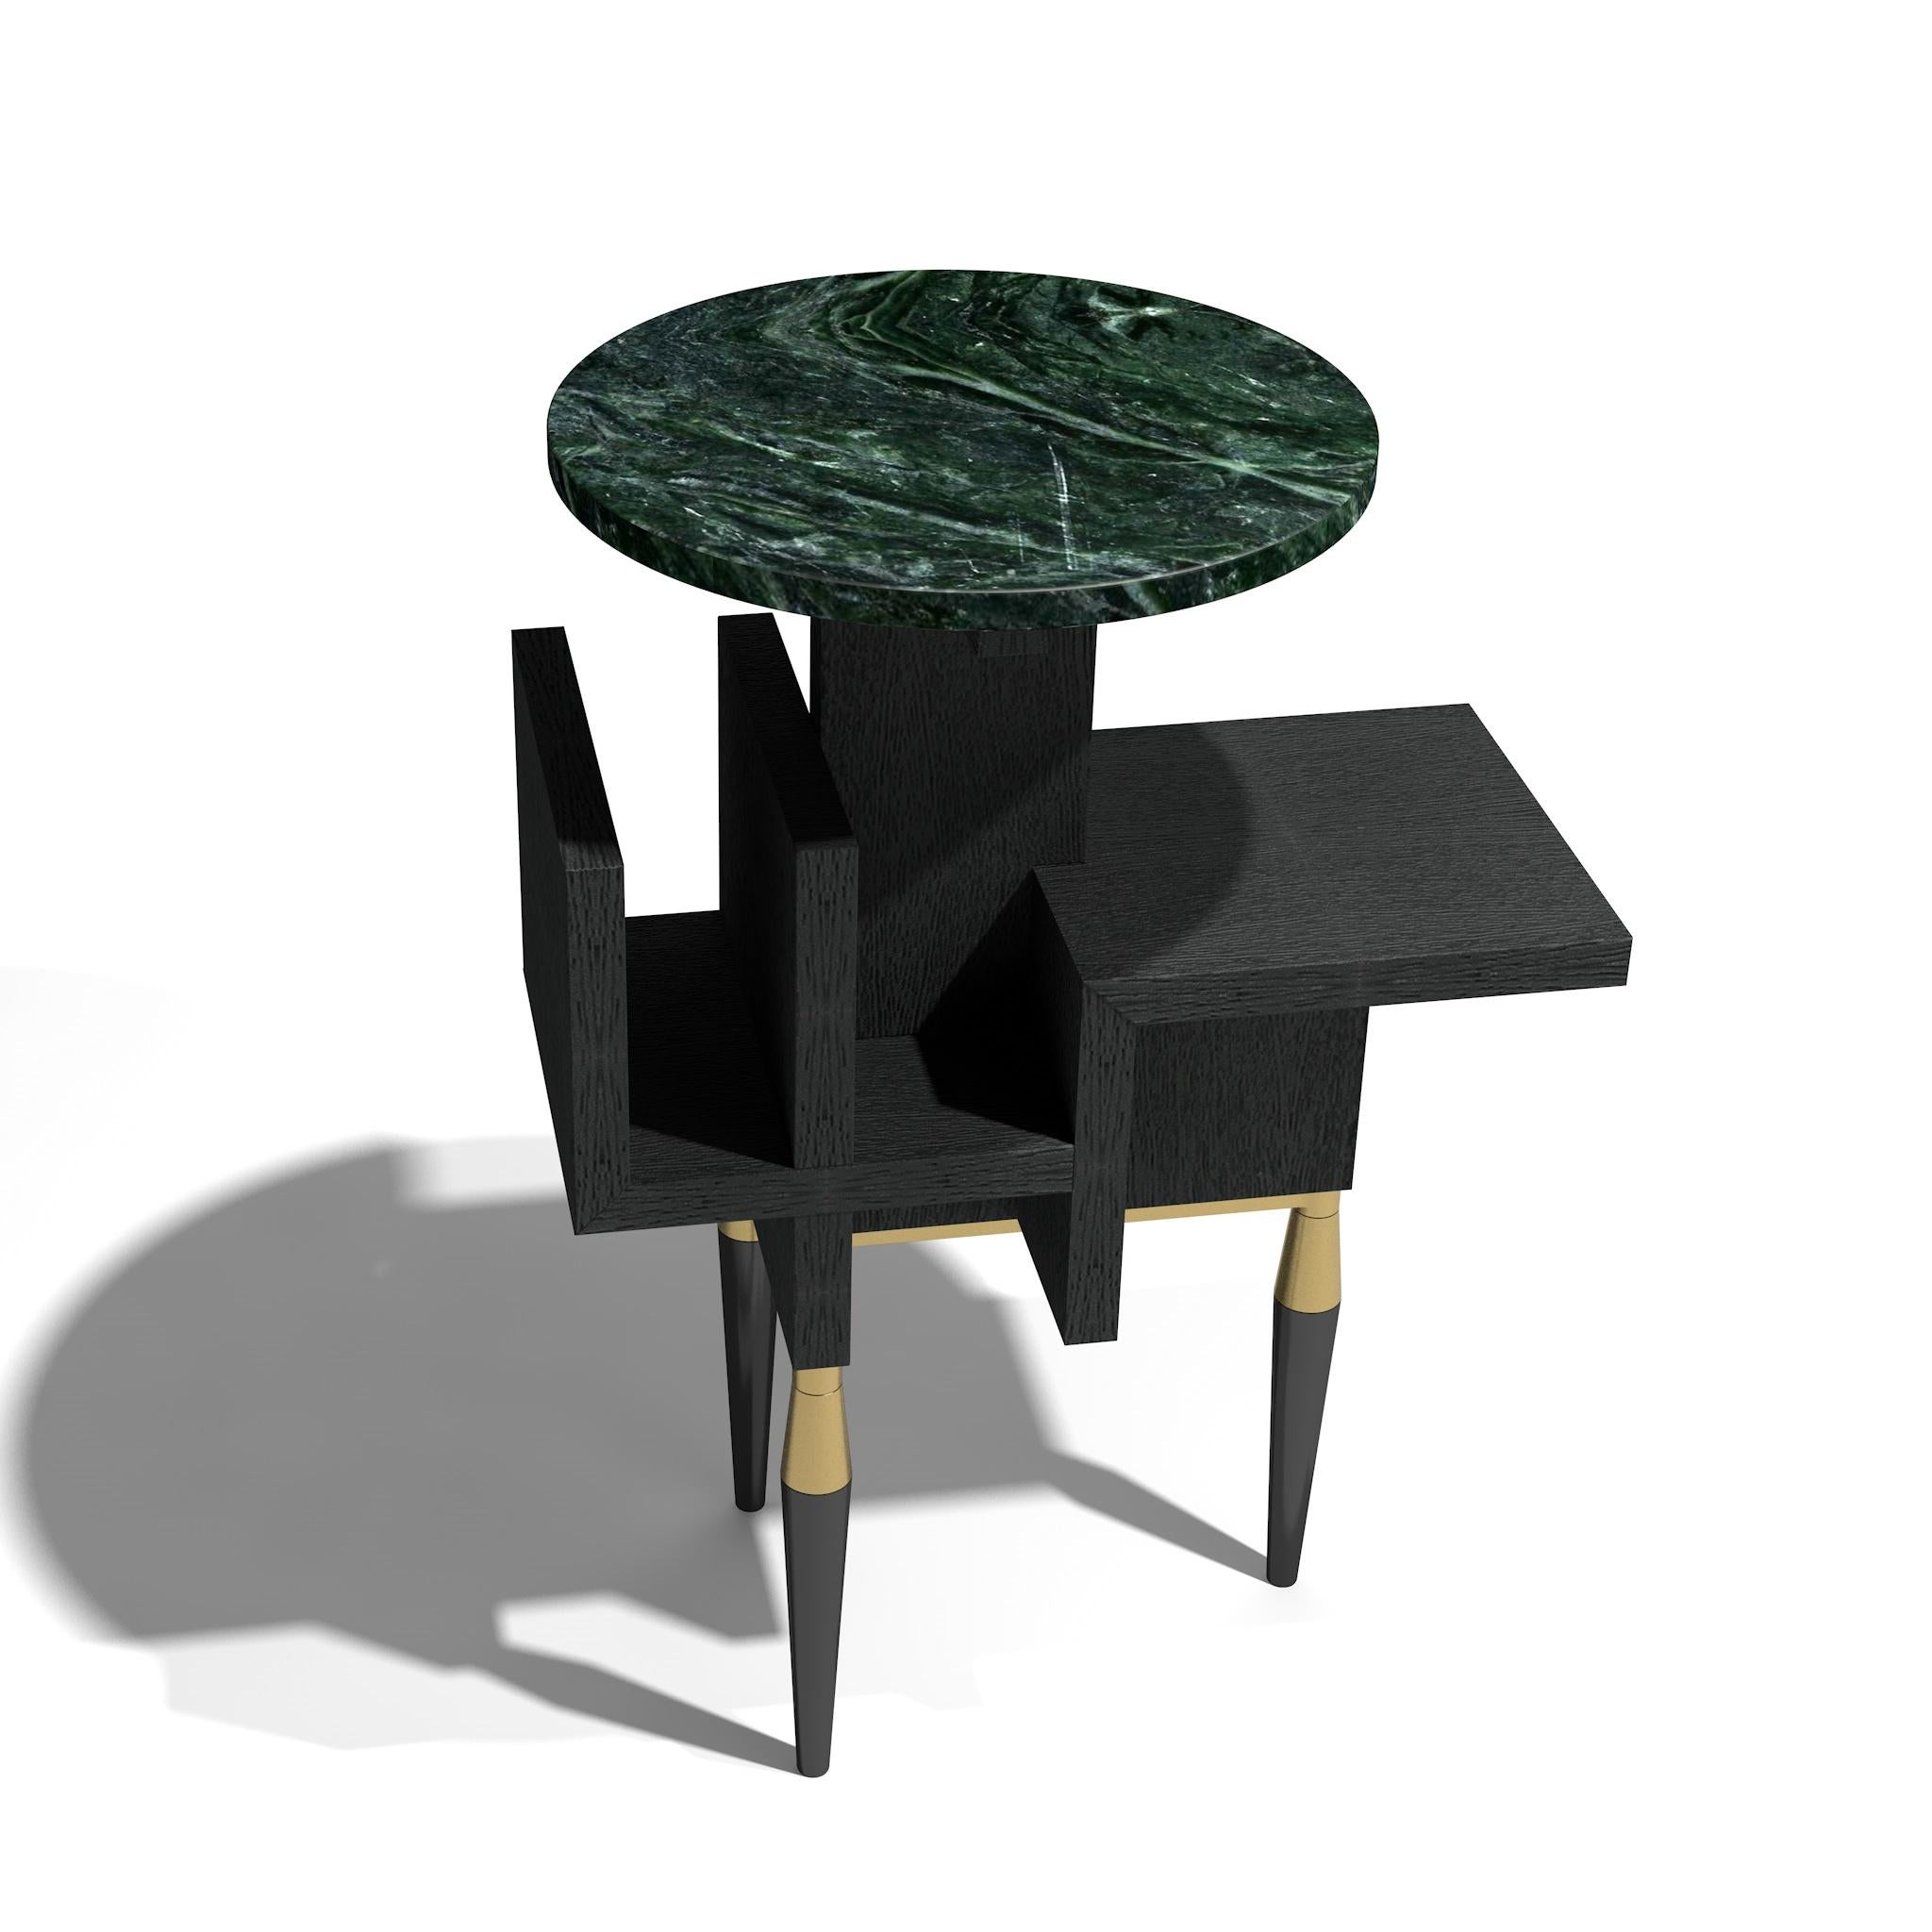 This lounge table has been created through detailed handcrafting with using of different high-quality materials stone, wood, brass. 
Like all objects in the studio 1 + 11, the Cosmo table is a play of form, lines and materials.
 It is primarily a